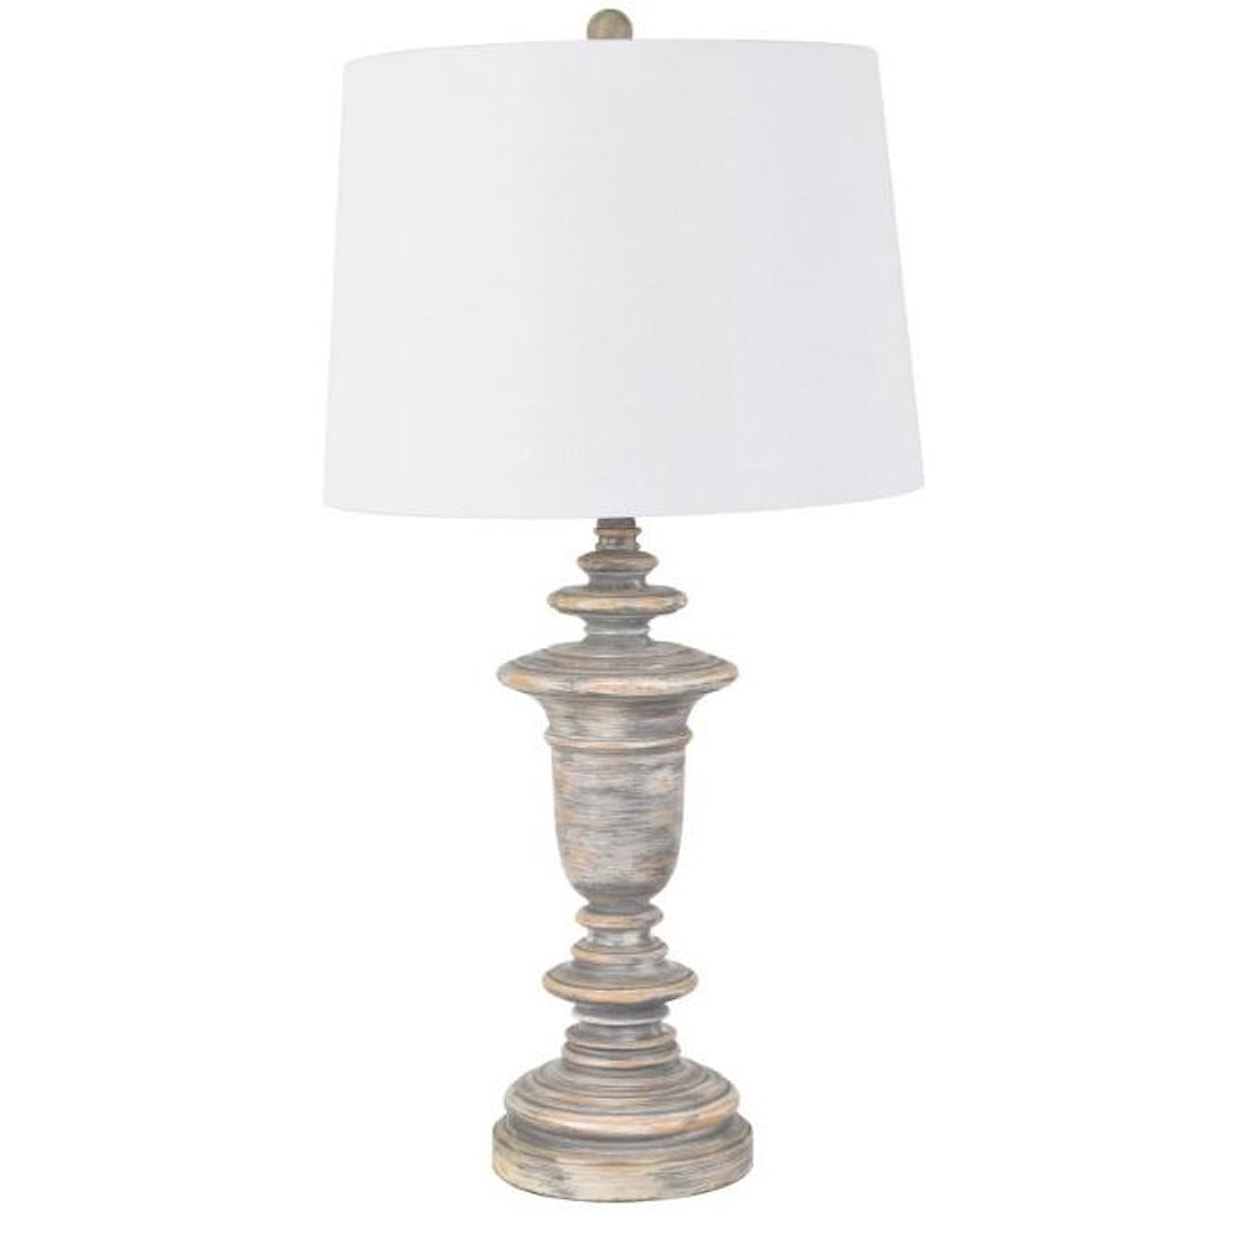 Crestview Collection Lighting Anders Table Lamp